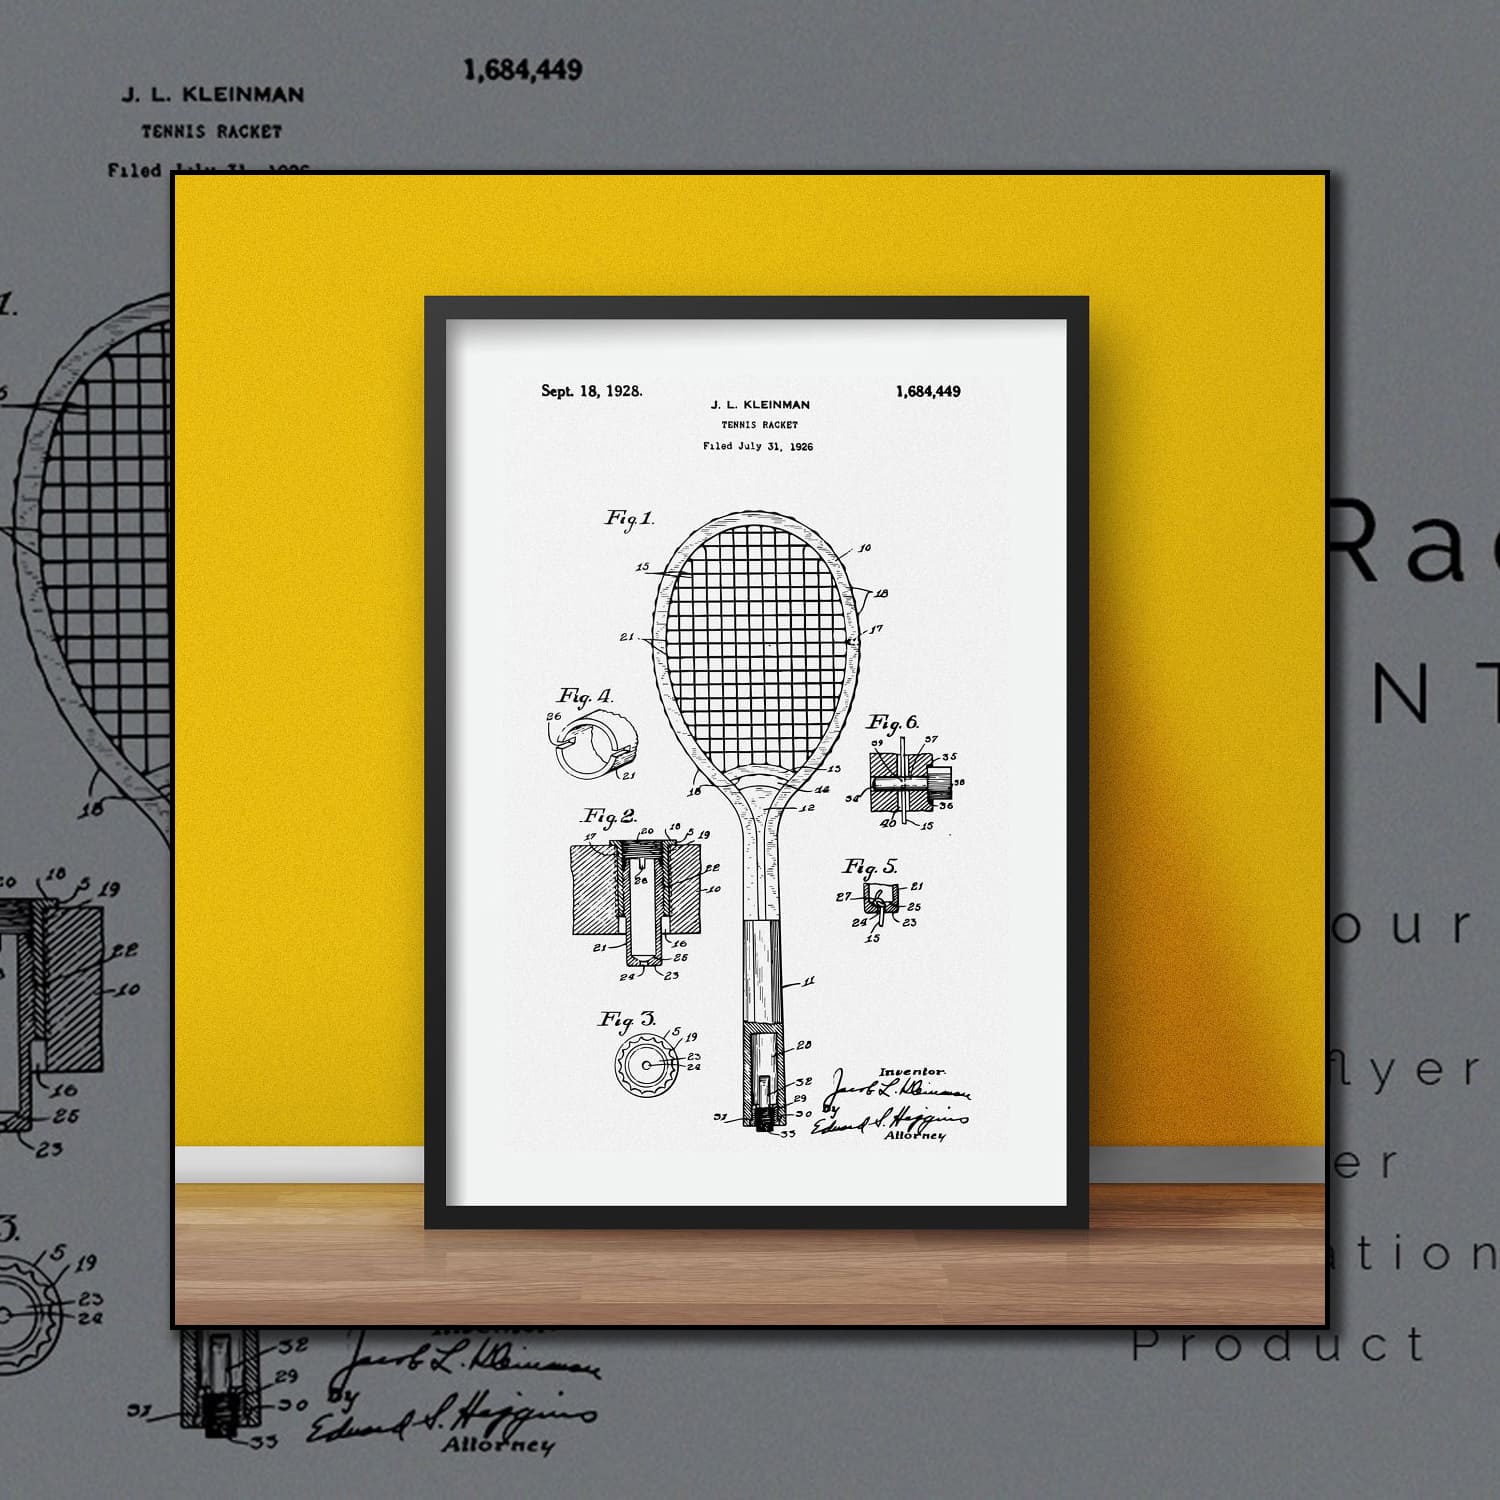 Tennis Racket Patent cover.